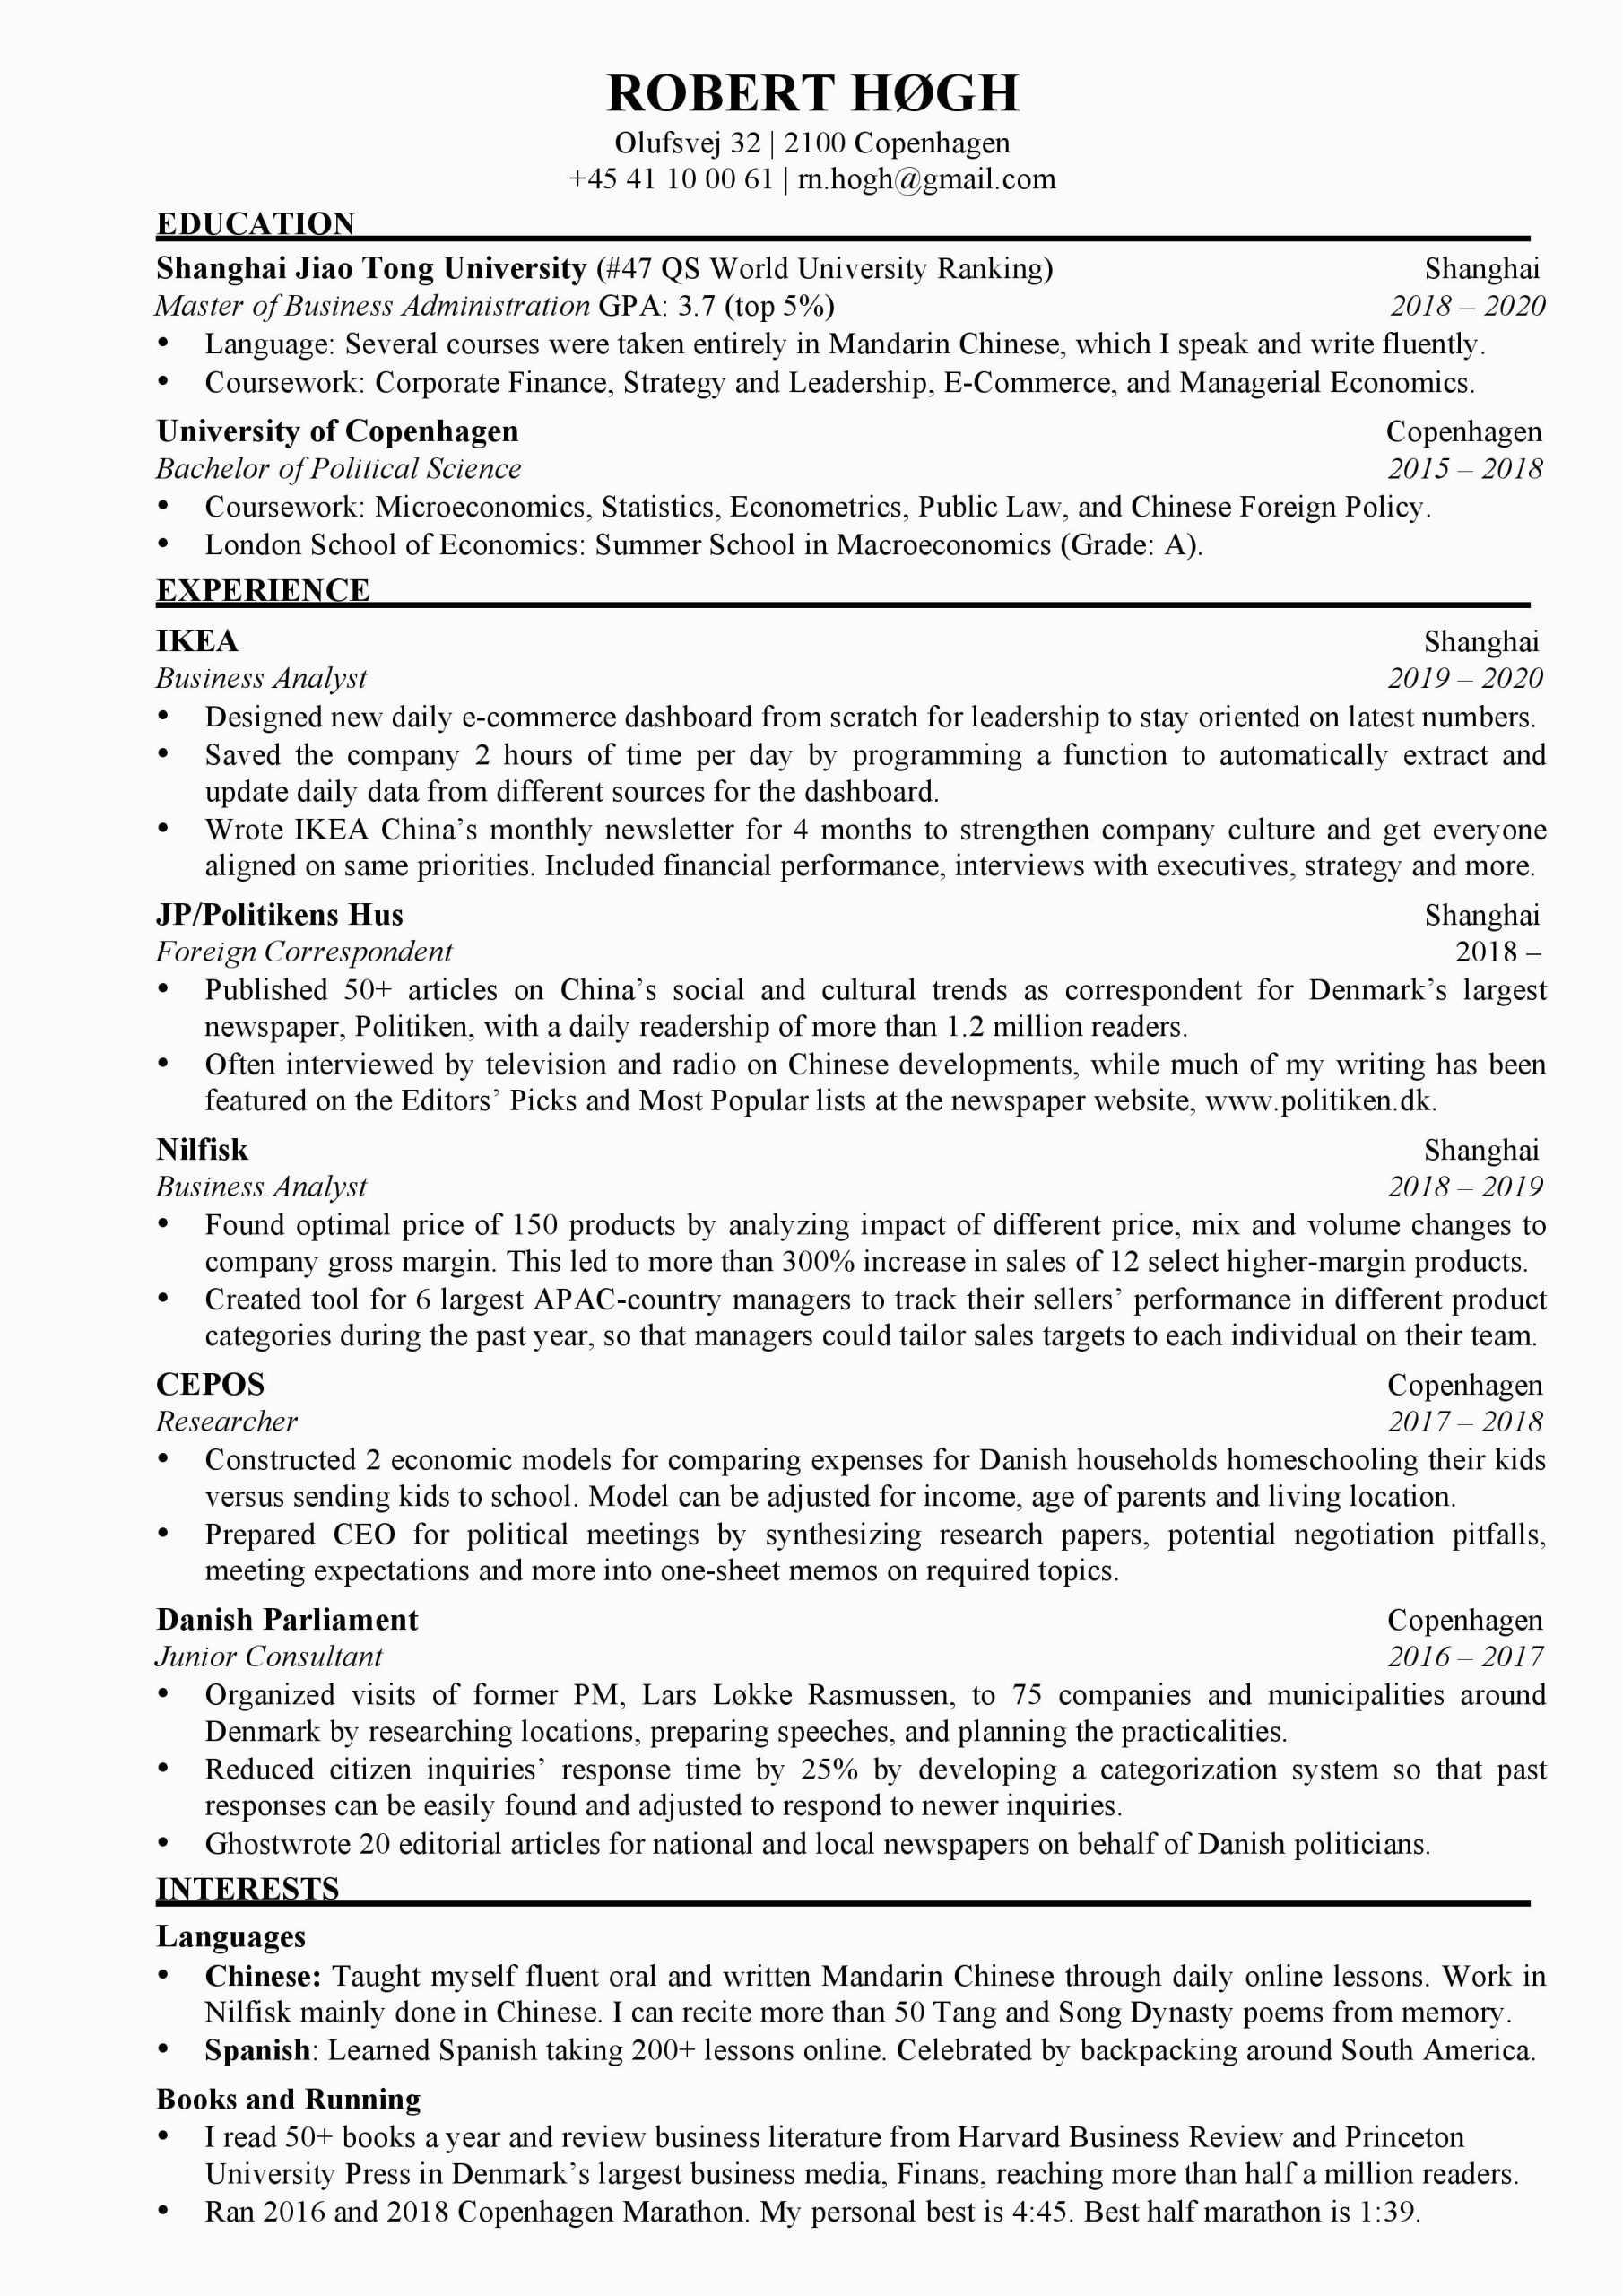 Sample Of Resume for Person that Got Mbb Improving My Resume